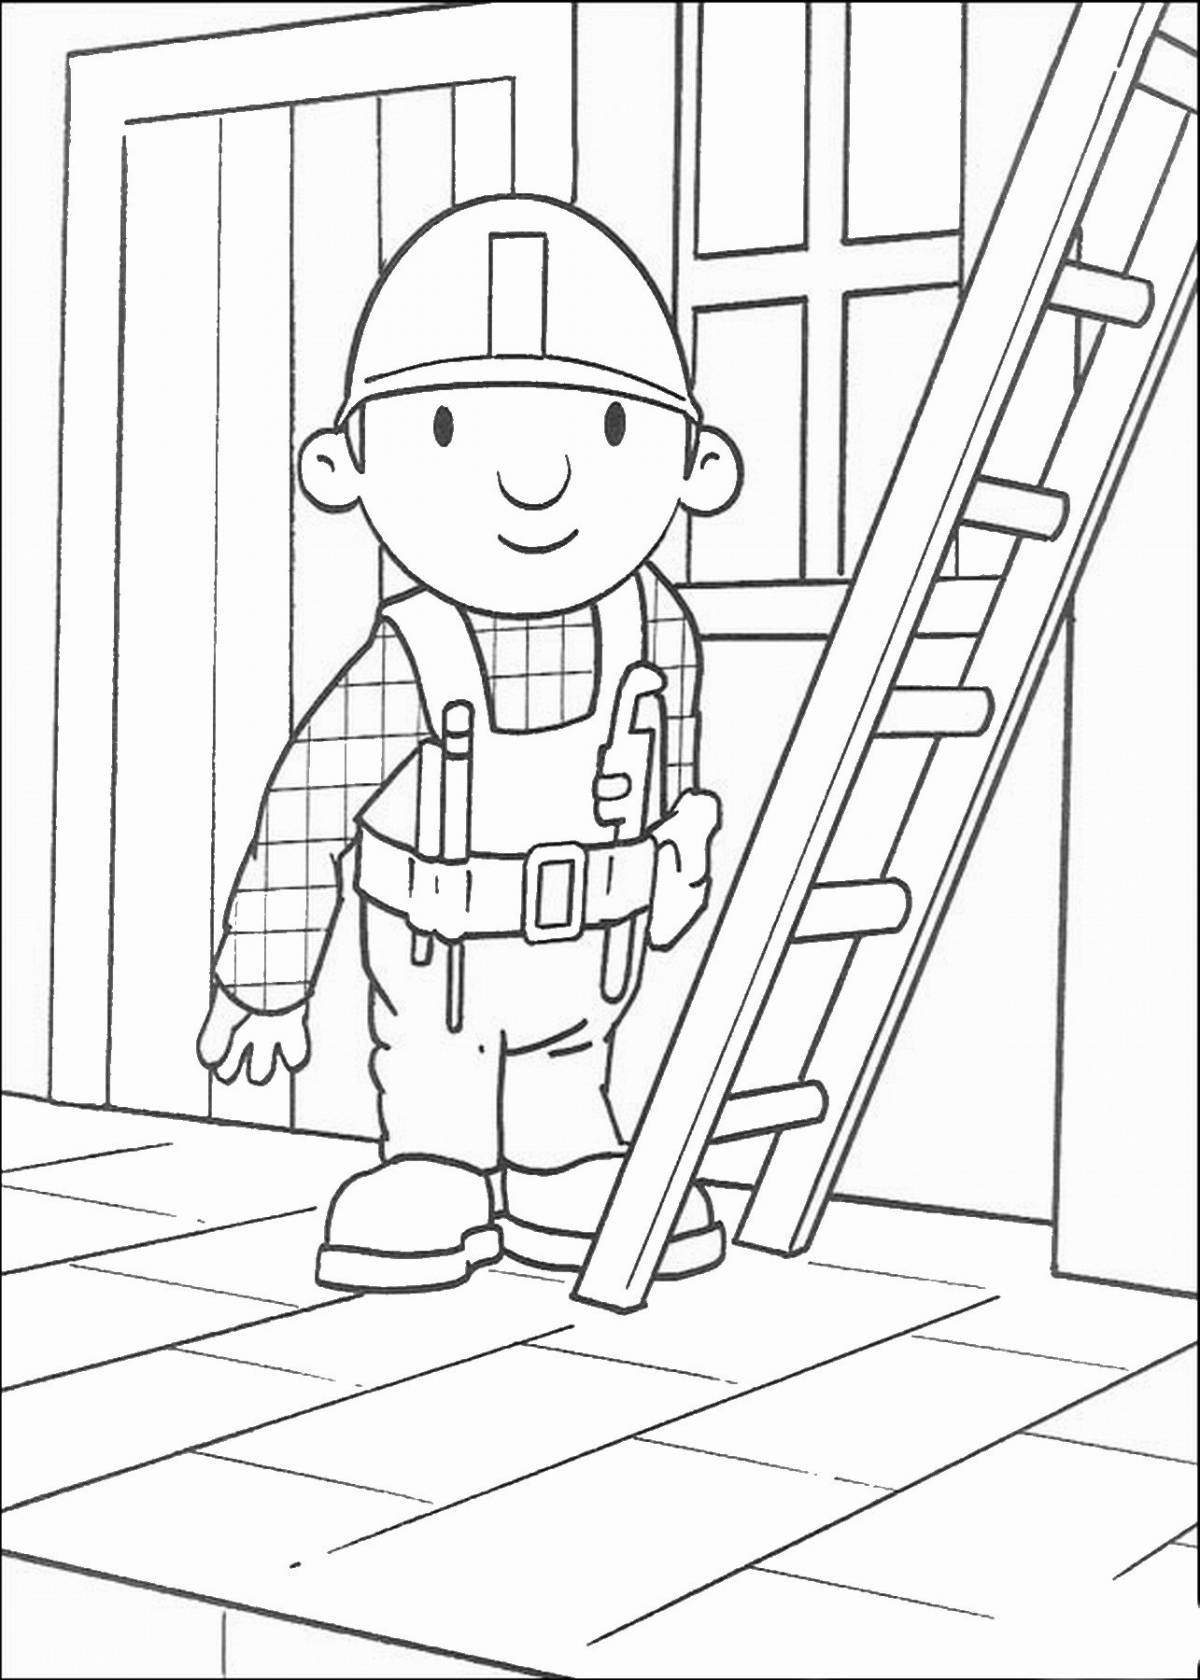 Innovative coloring page maker